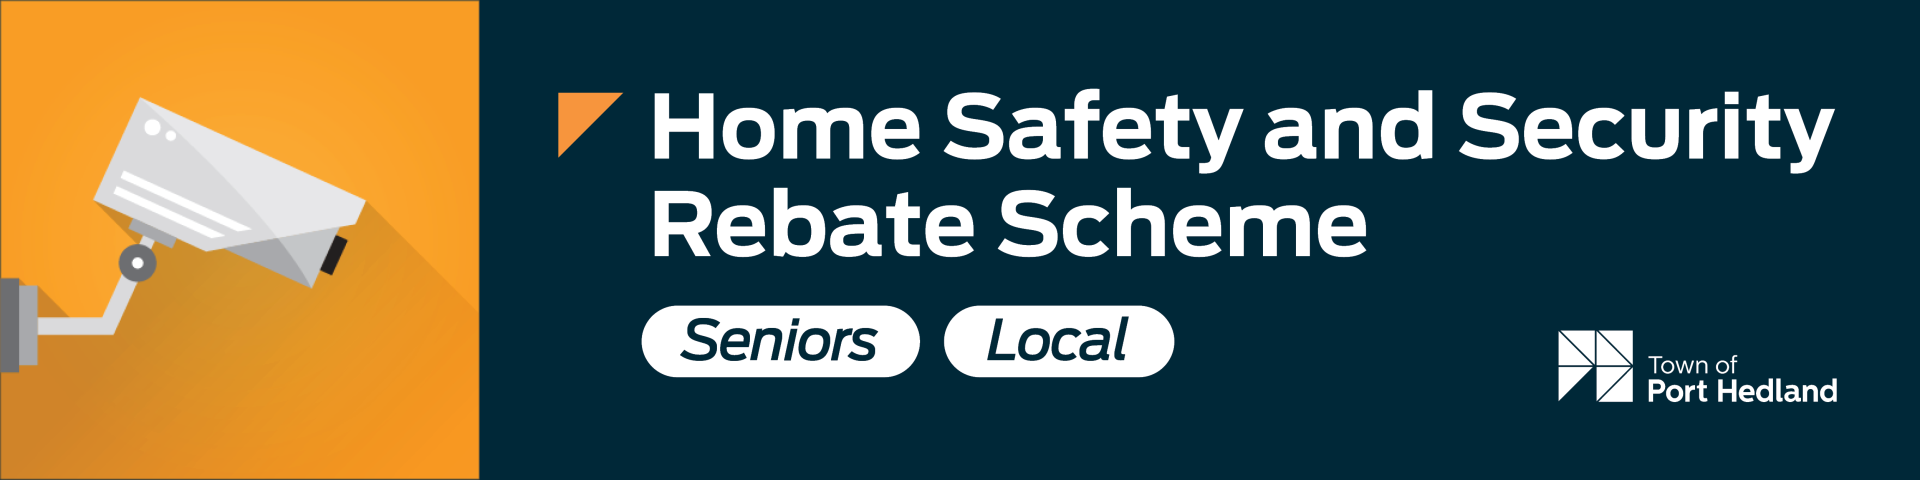 Home Safety and Security Rebate Scheme